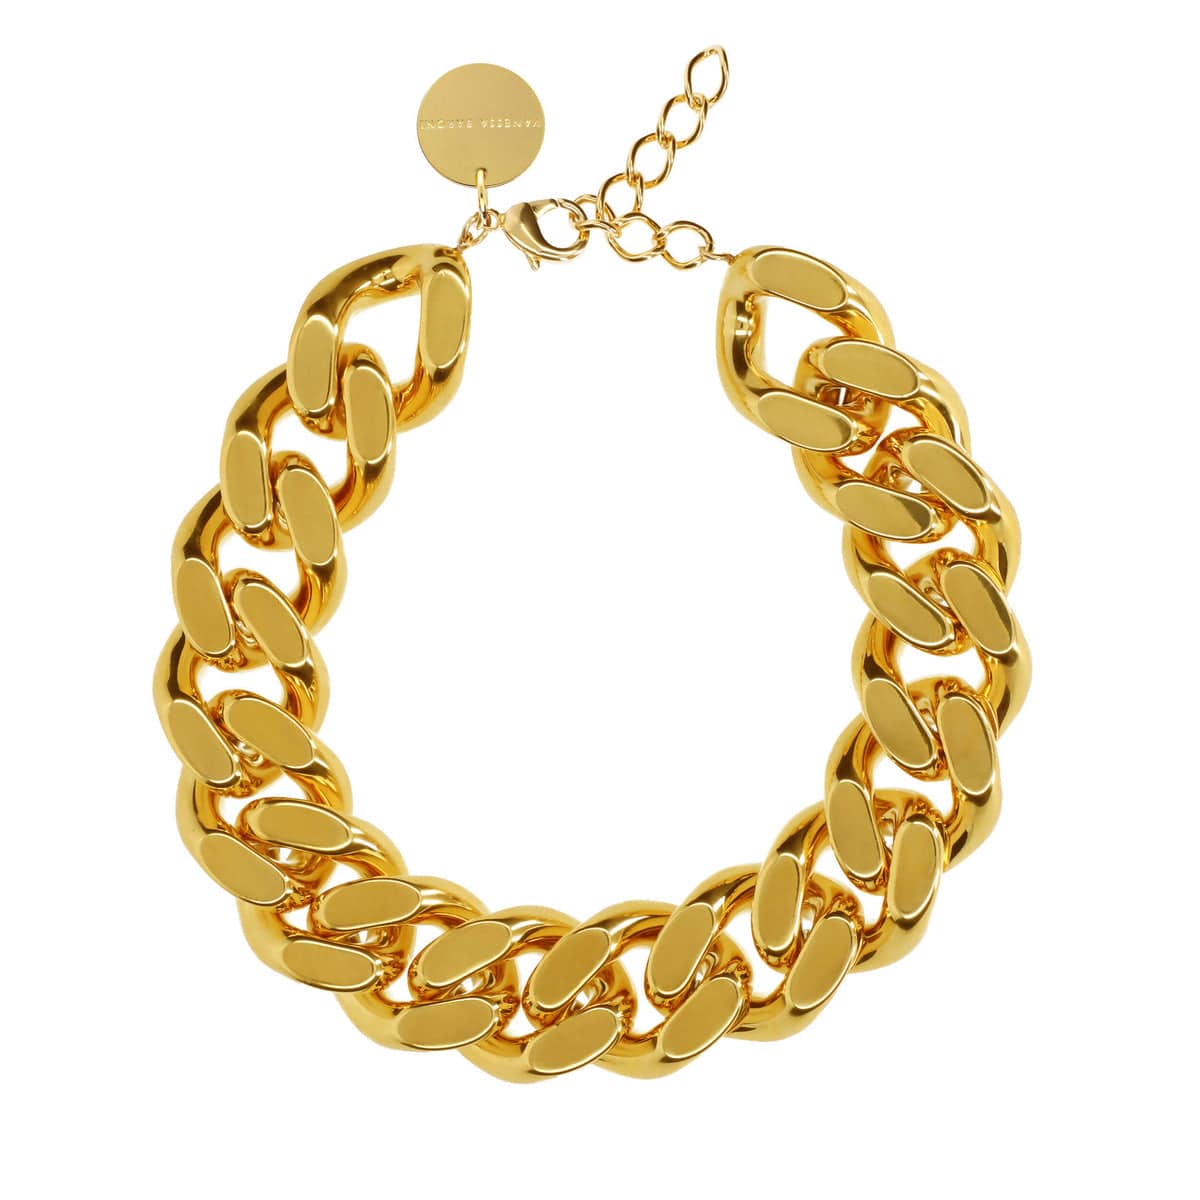 Big Flat Chain Necklace - Gold